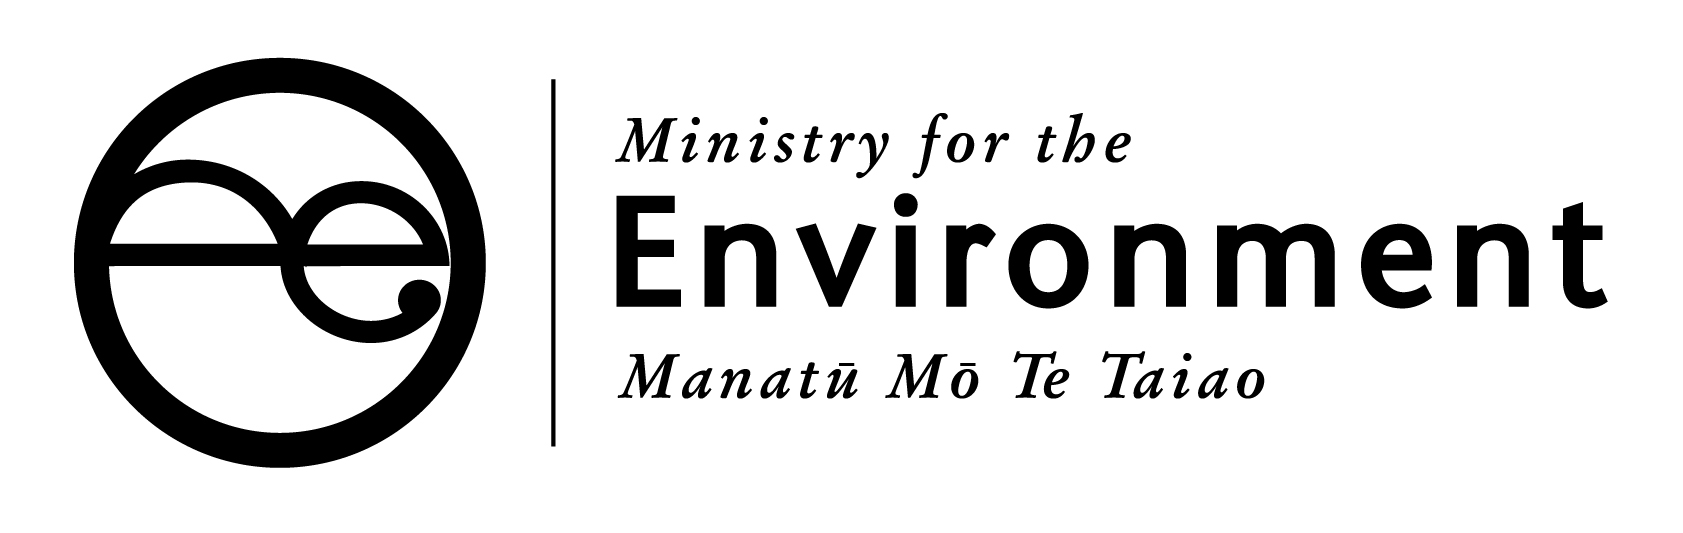 Ministry for the Environment Logo